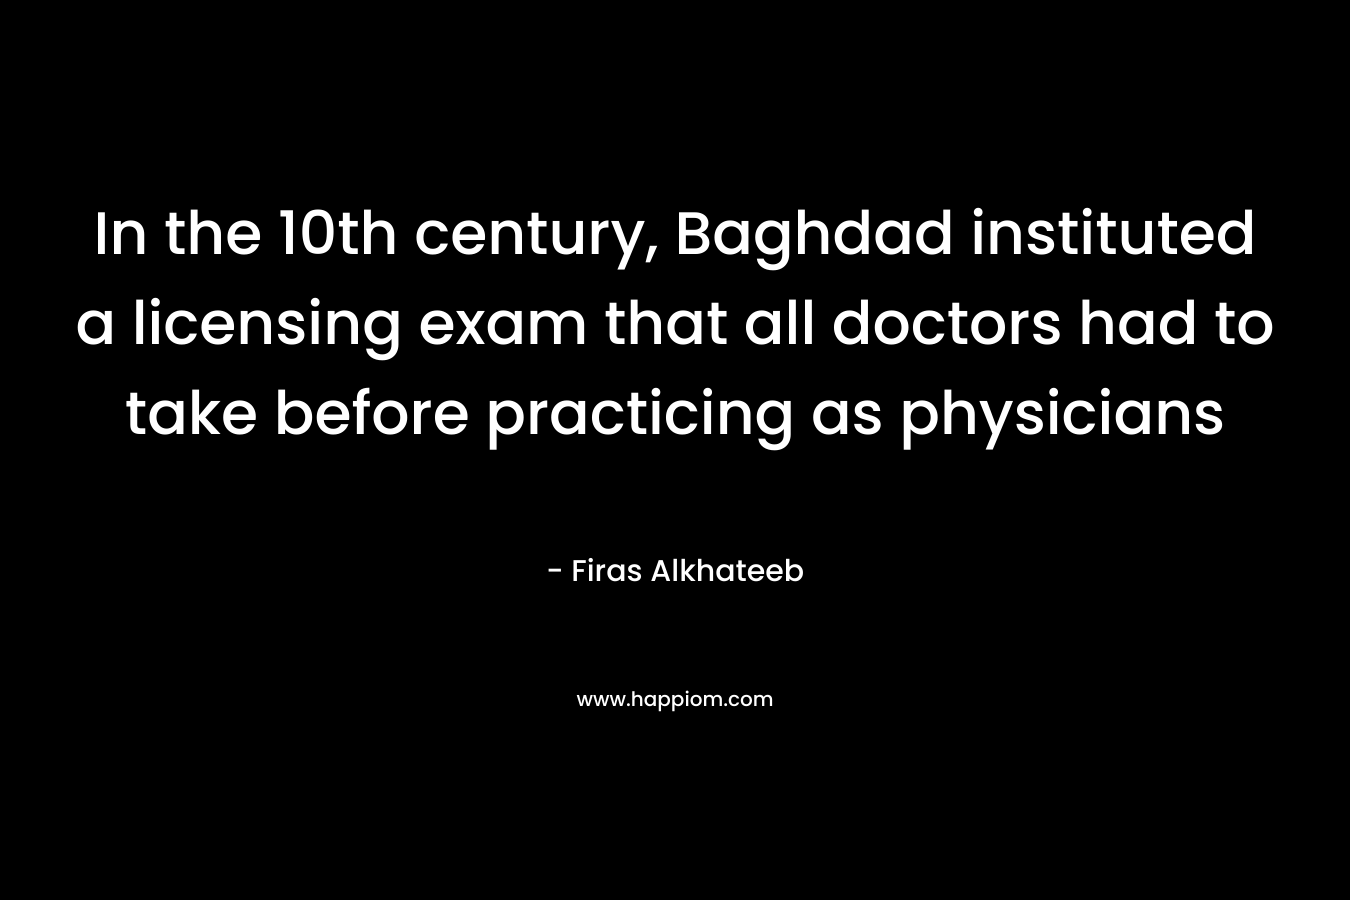 In the 10th century, Baghdad instituted a licensing exam that all doctors had to take before practicing as physicians